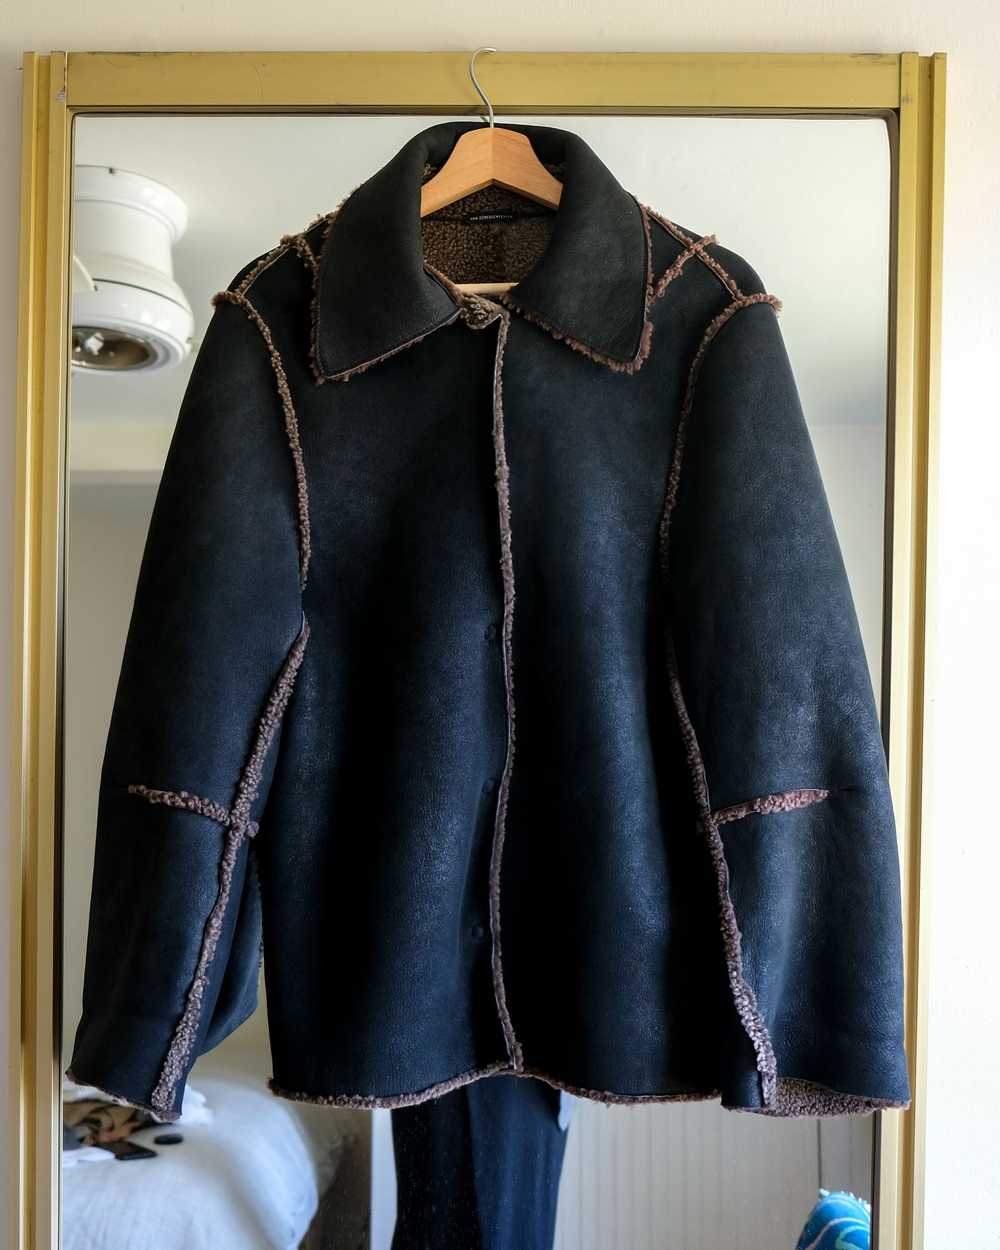 Ann Demeulemeester AW99 Shearling Jacket - image 2